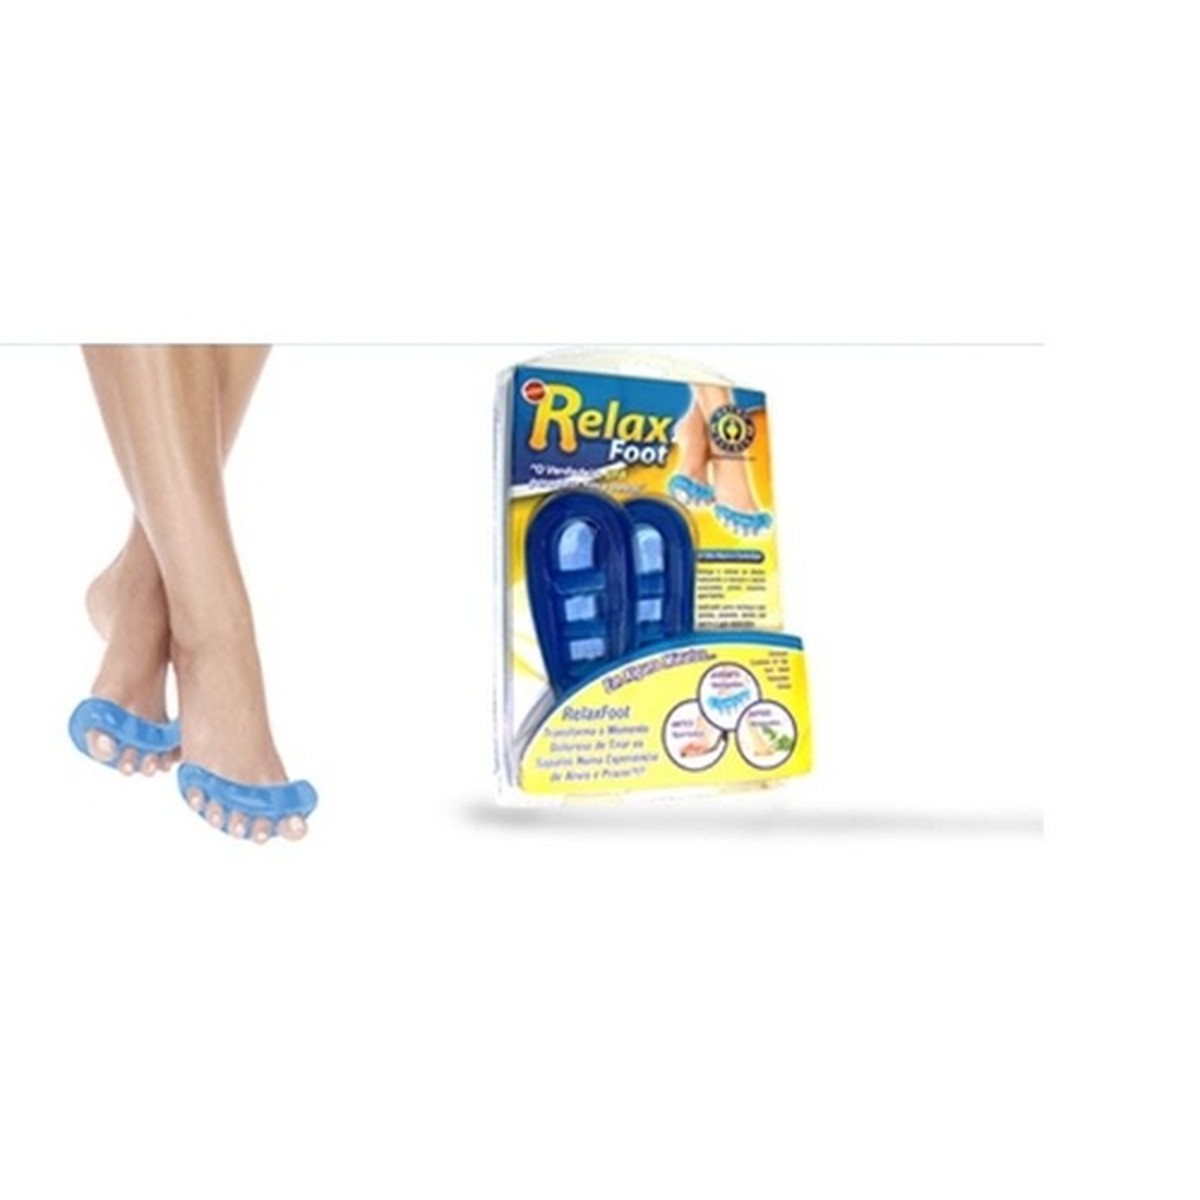 Foto do produto Relax Foot ref 1040 - OrthoPauher 